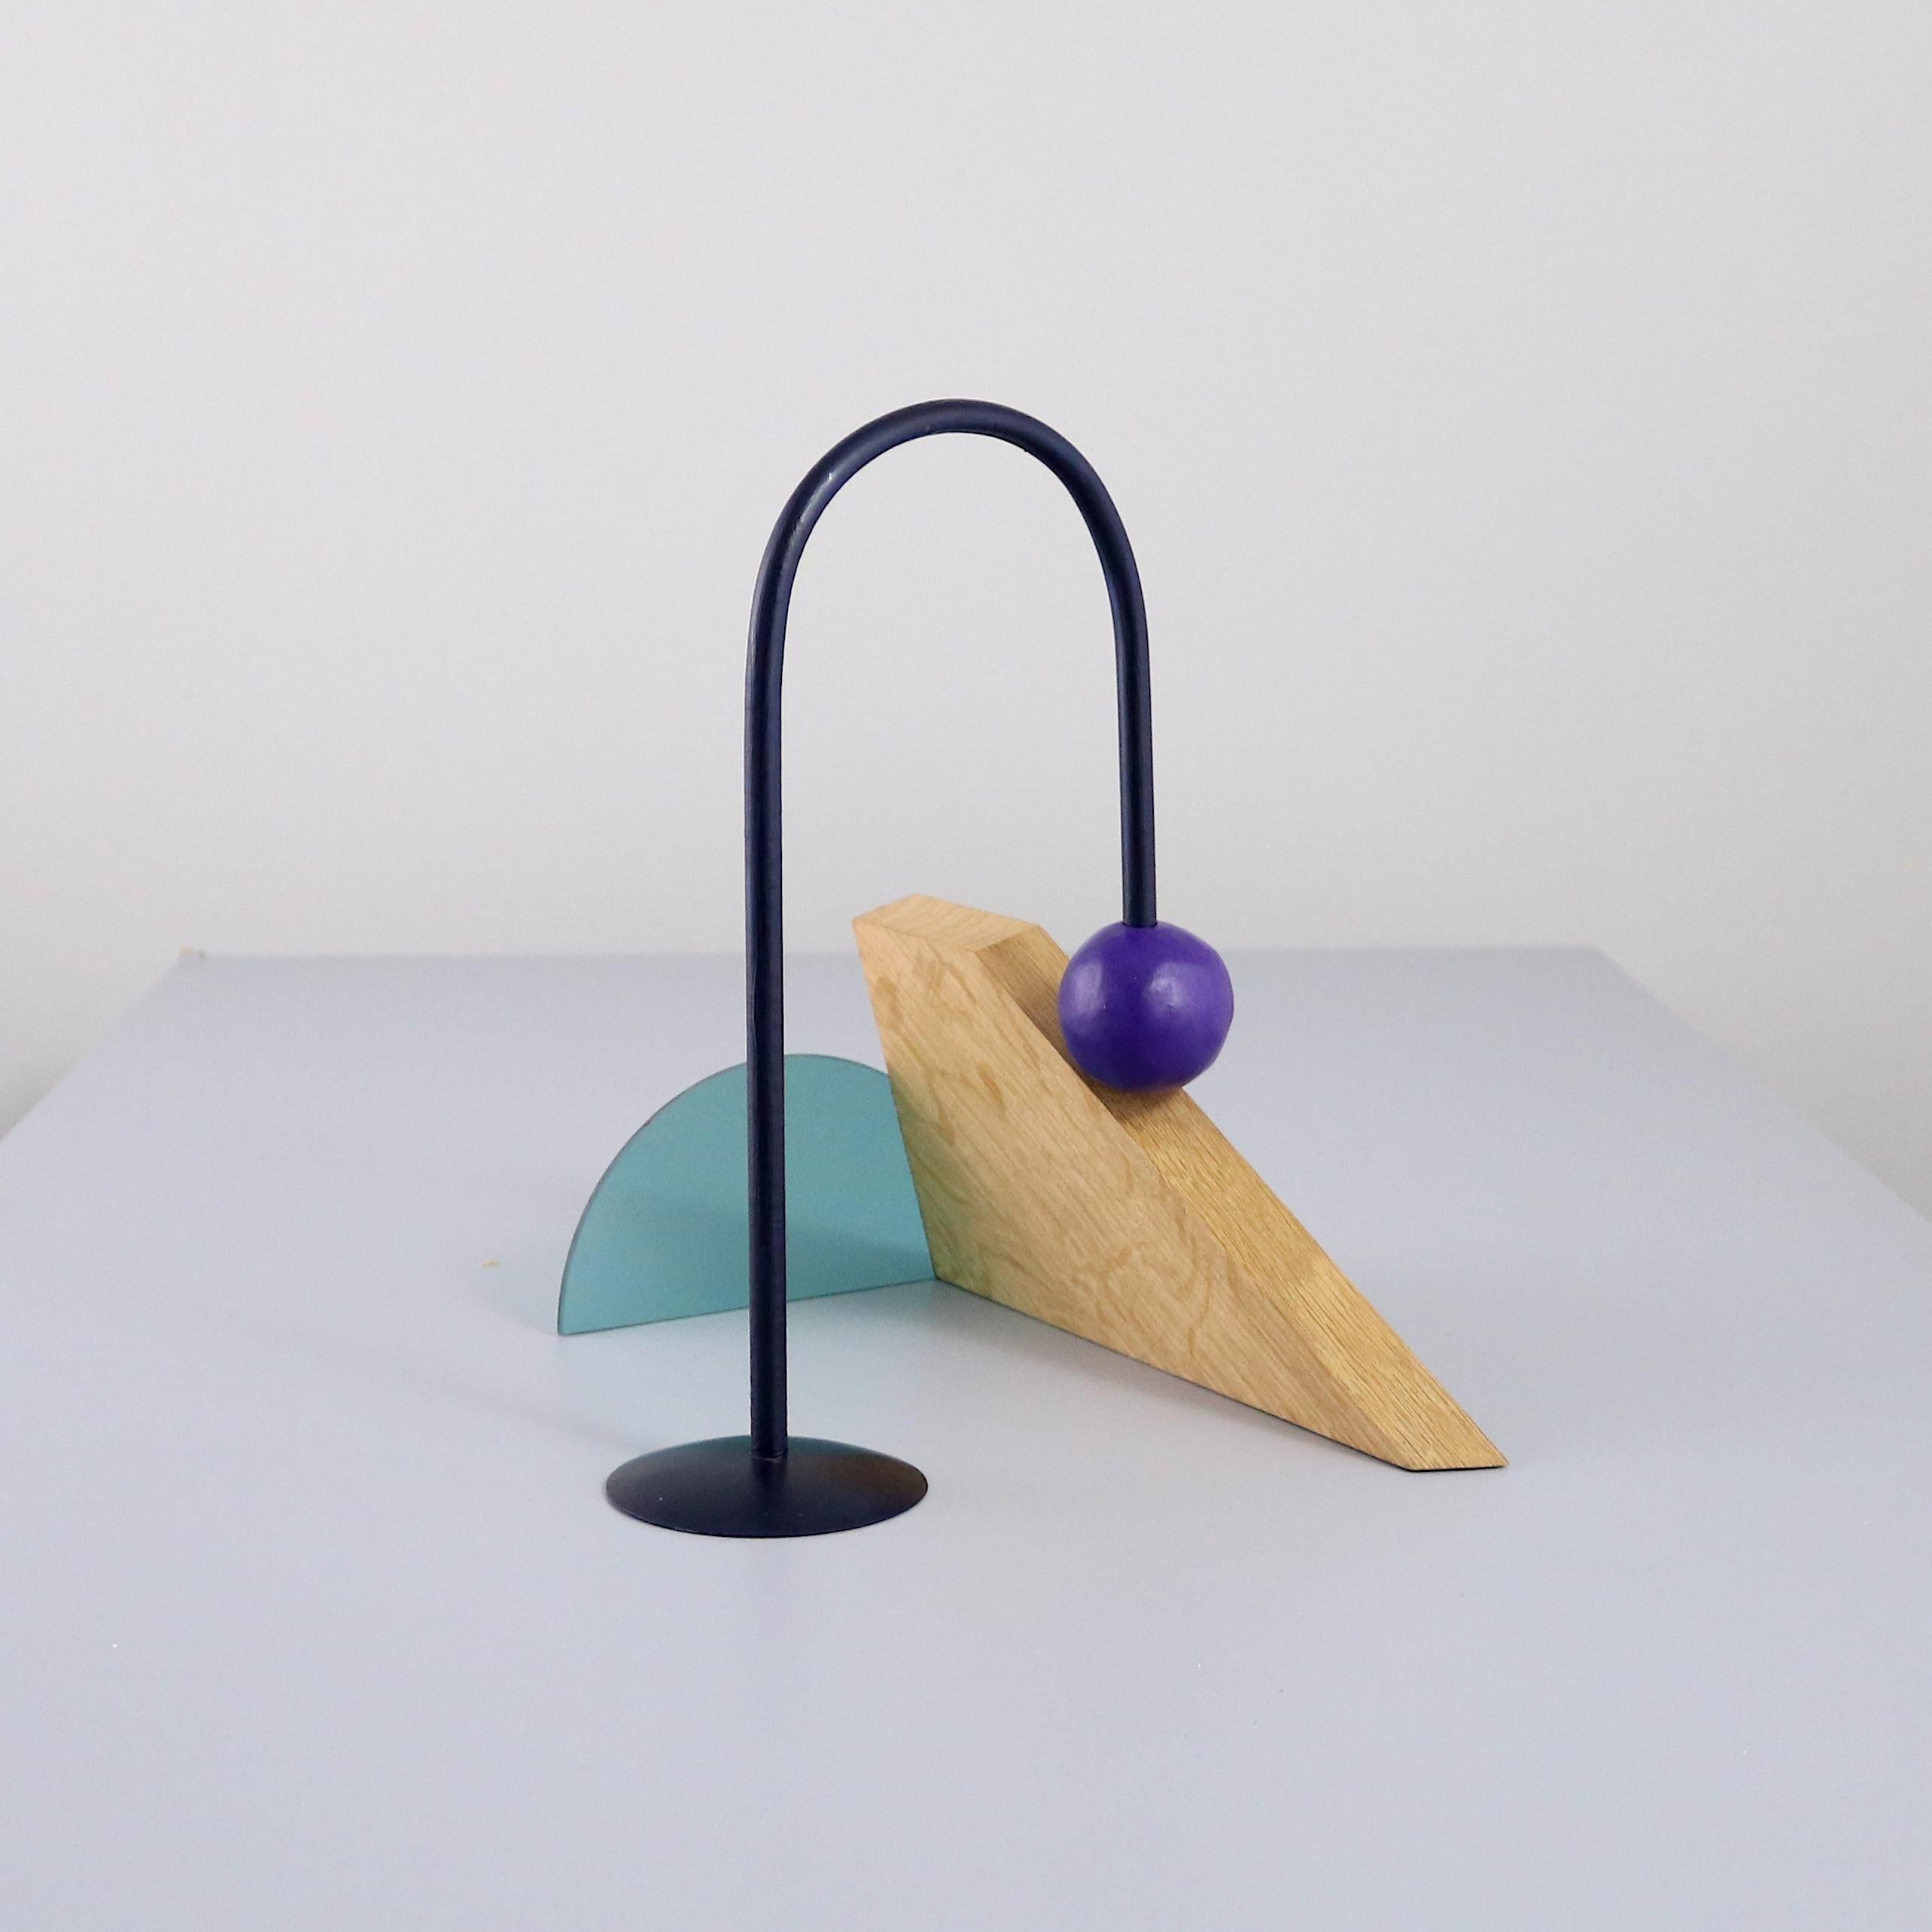 Ferris McGuinty Abstract Sculpture - Other upright objects